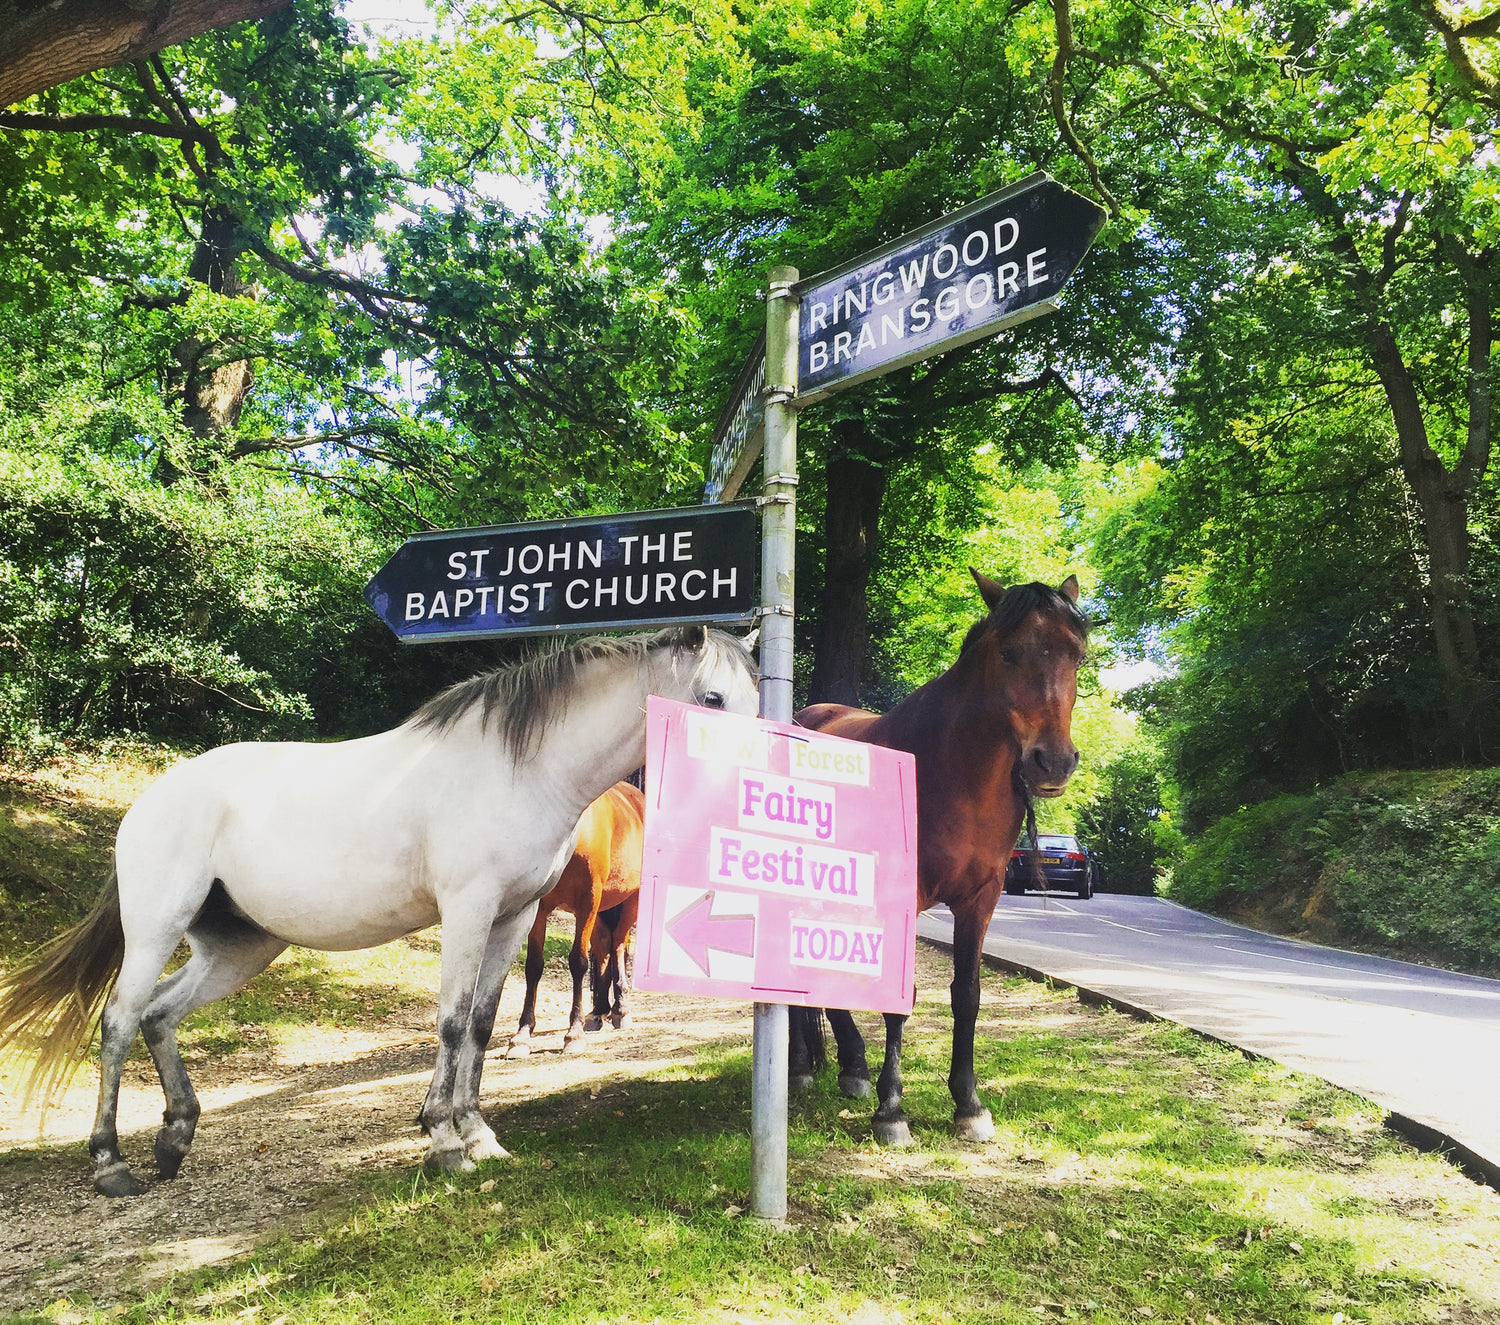 A Special Post from The New Forest Fairy Festival